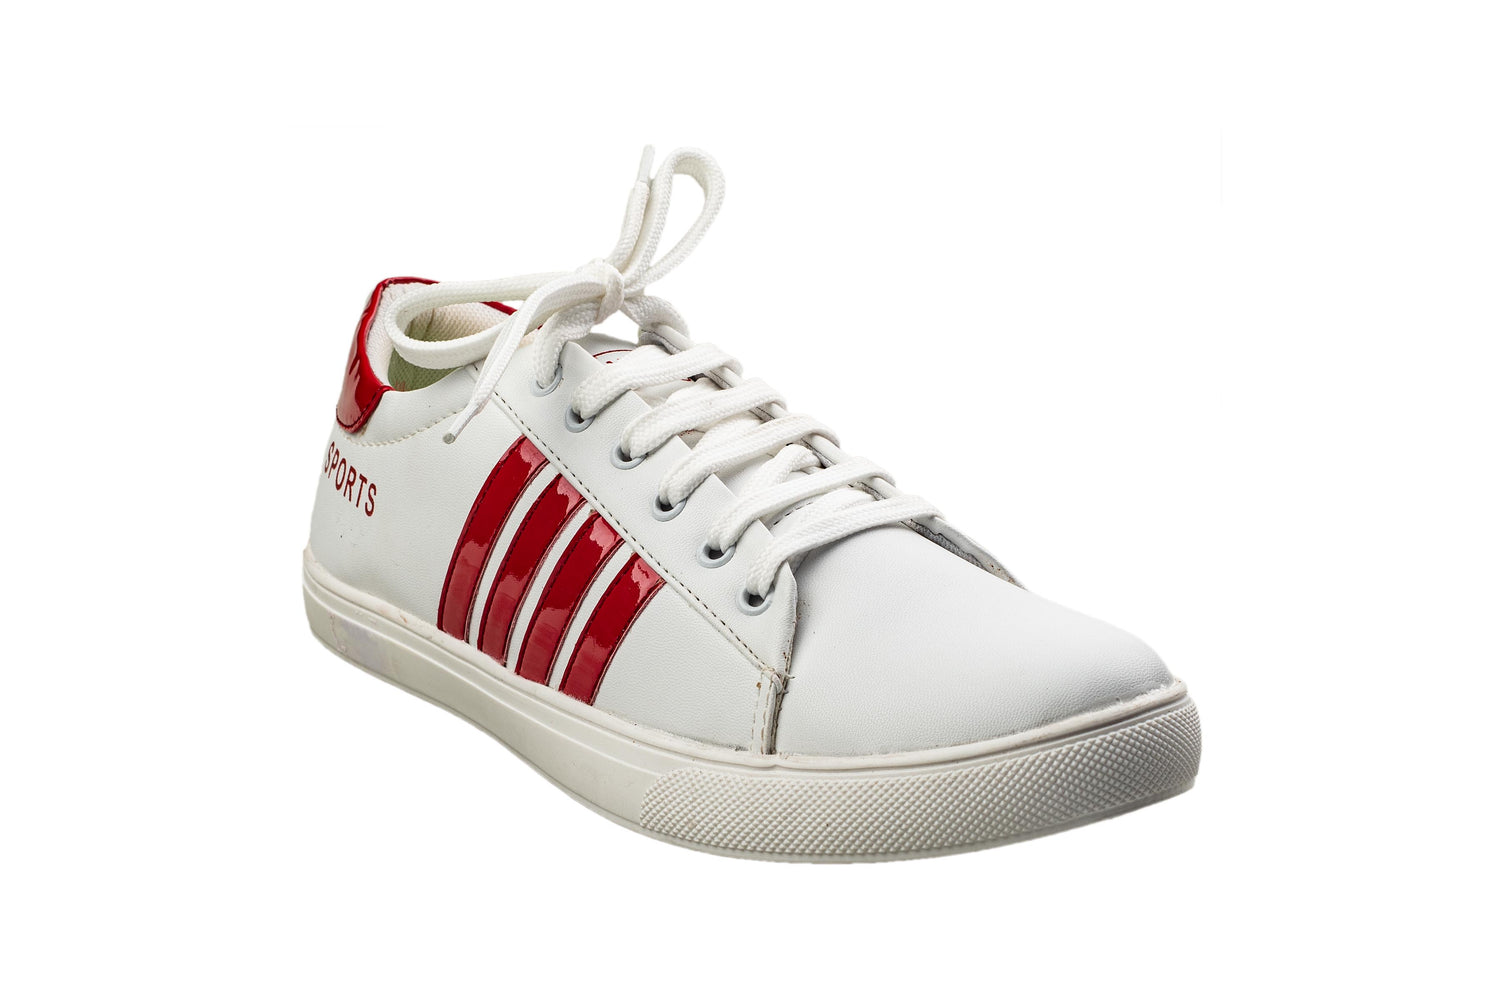 Urbanity Gents White / Red Canvas Shoe